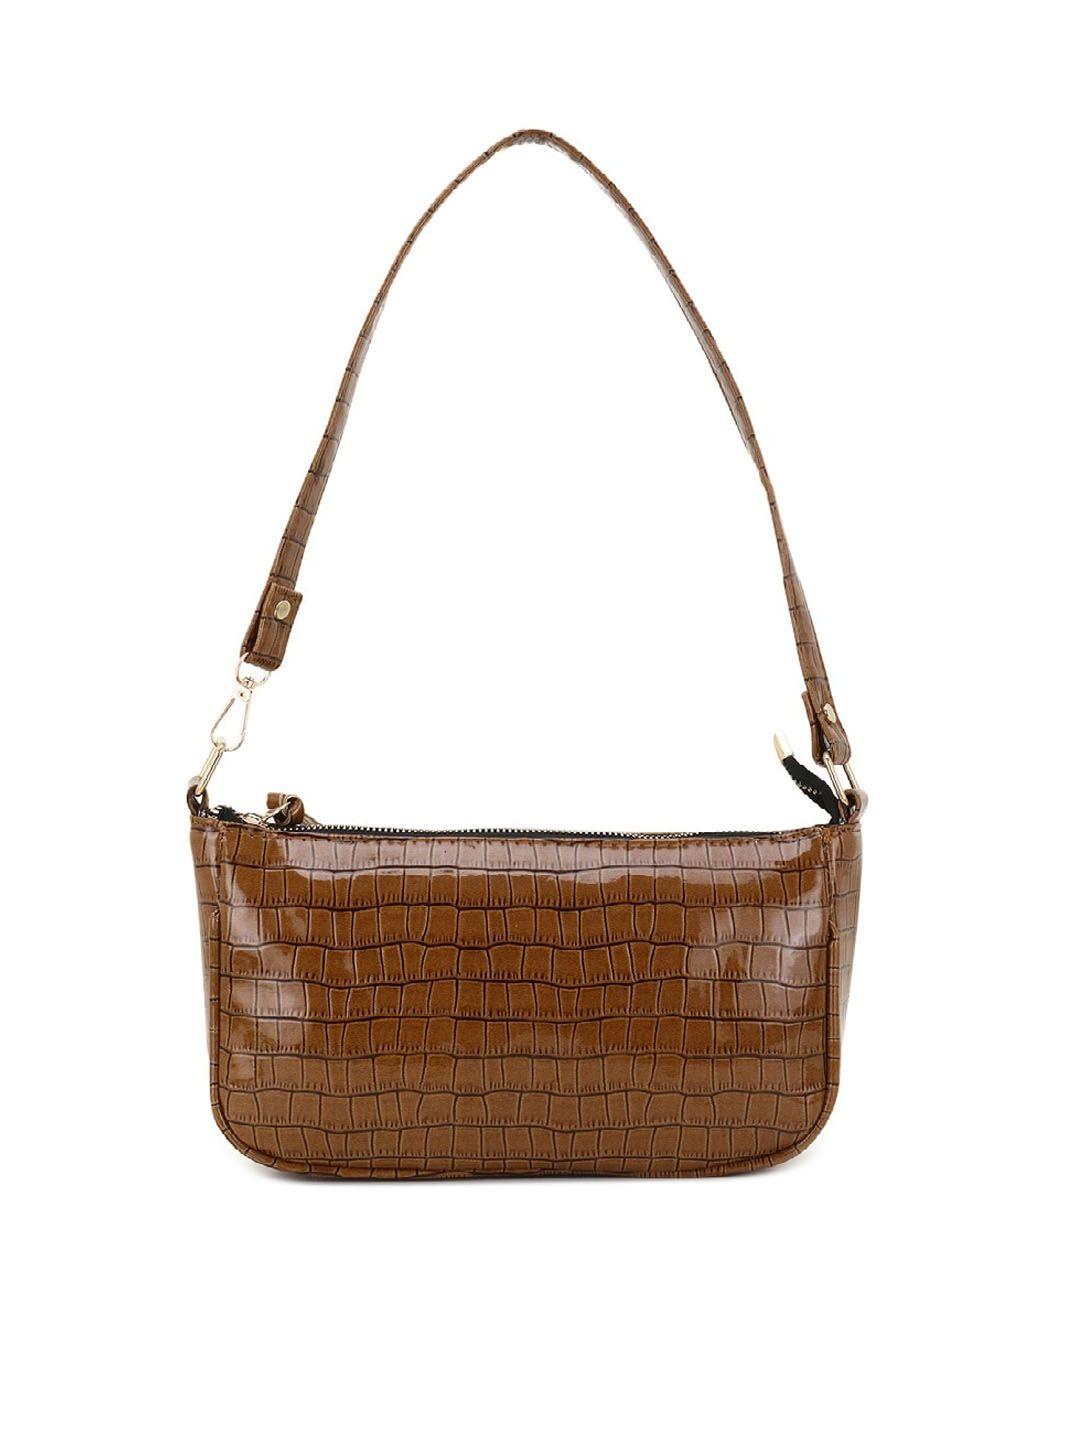 lychee bags tan brown textured pu structured shoulder bag